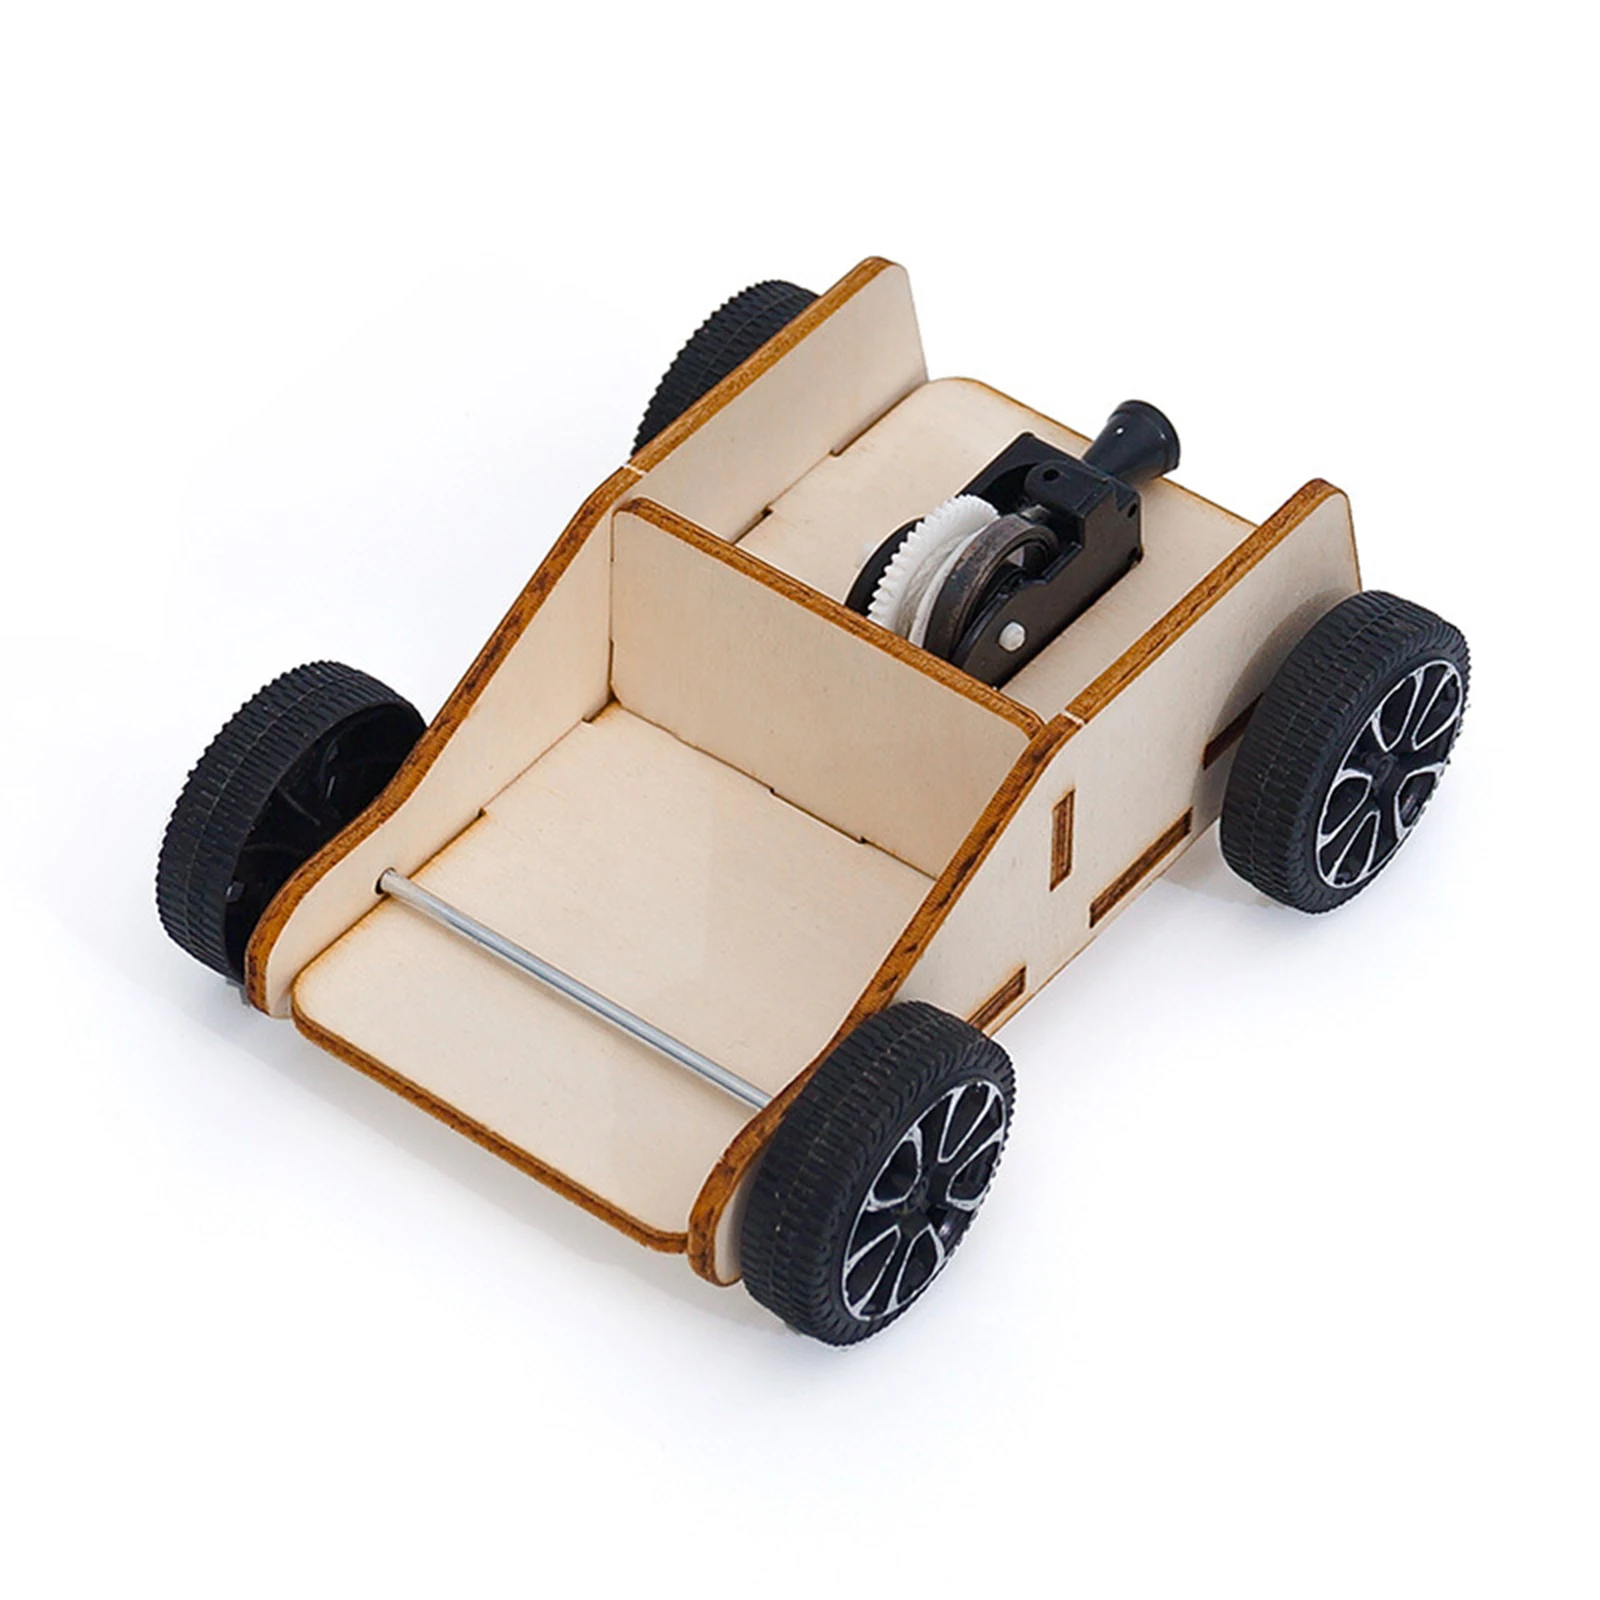 Pull Trolley DIY Car Science Education Souptoys Wooden Puzzle Model Building Block Kits Assembly Toy Gift for Children Adult  - buy with discount